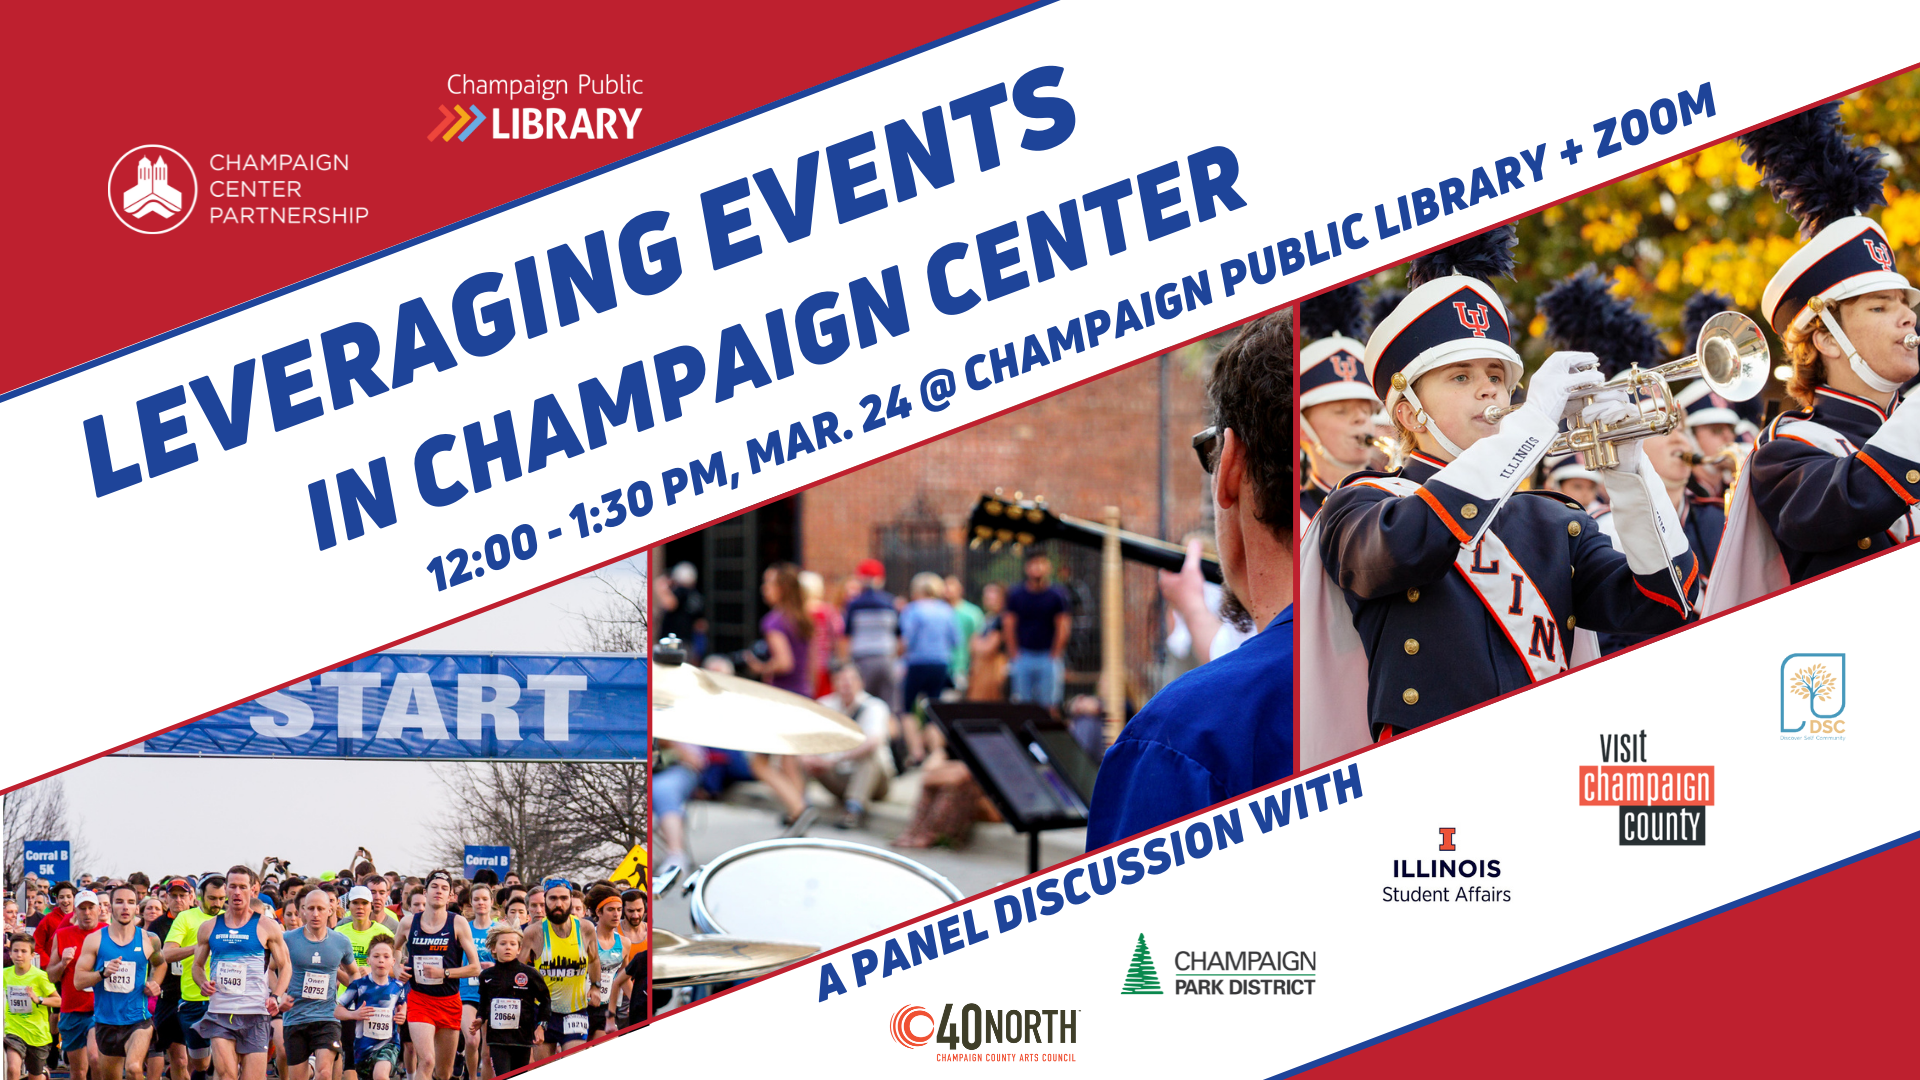 Image for Leveraging Events in Champaign Center